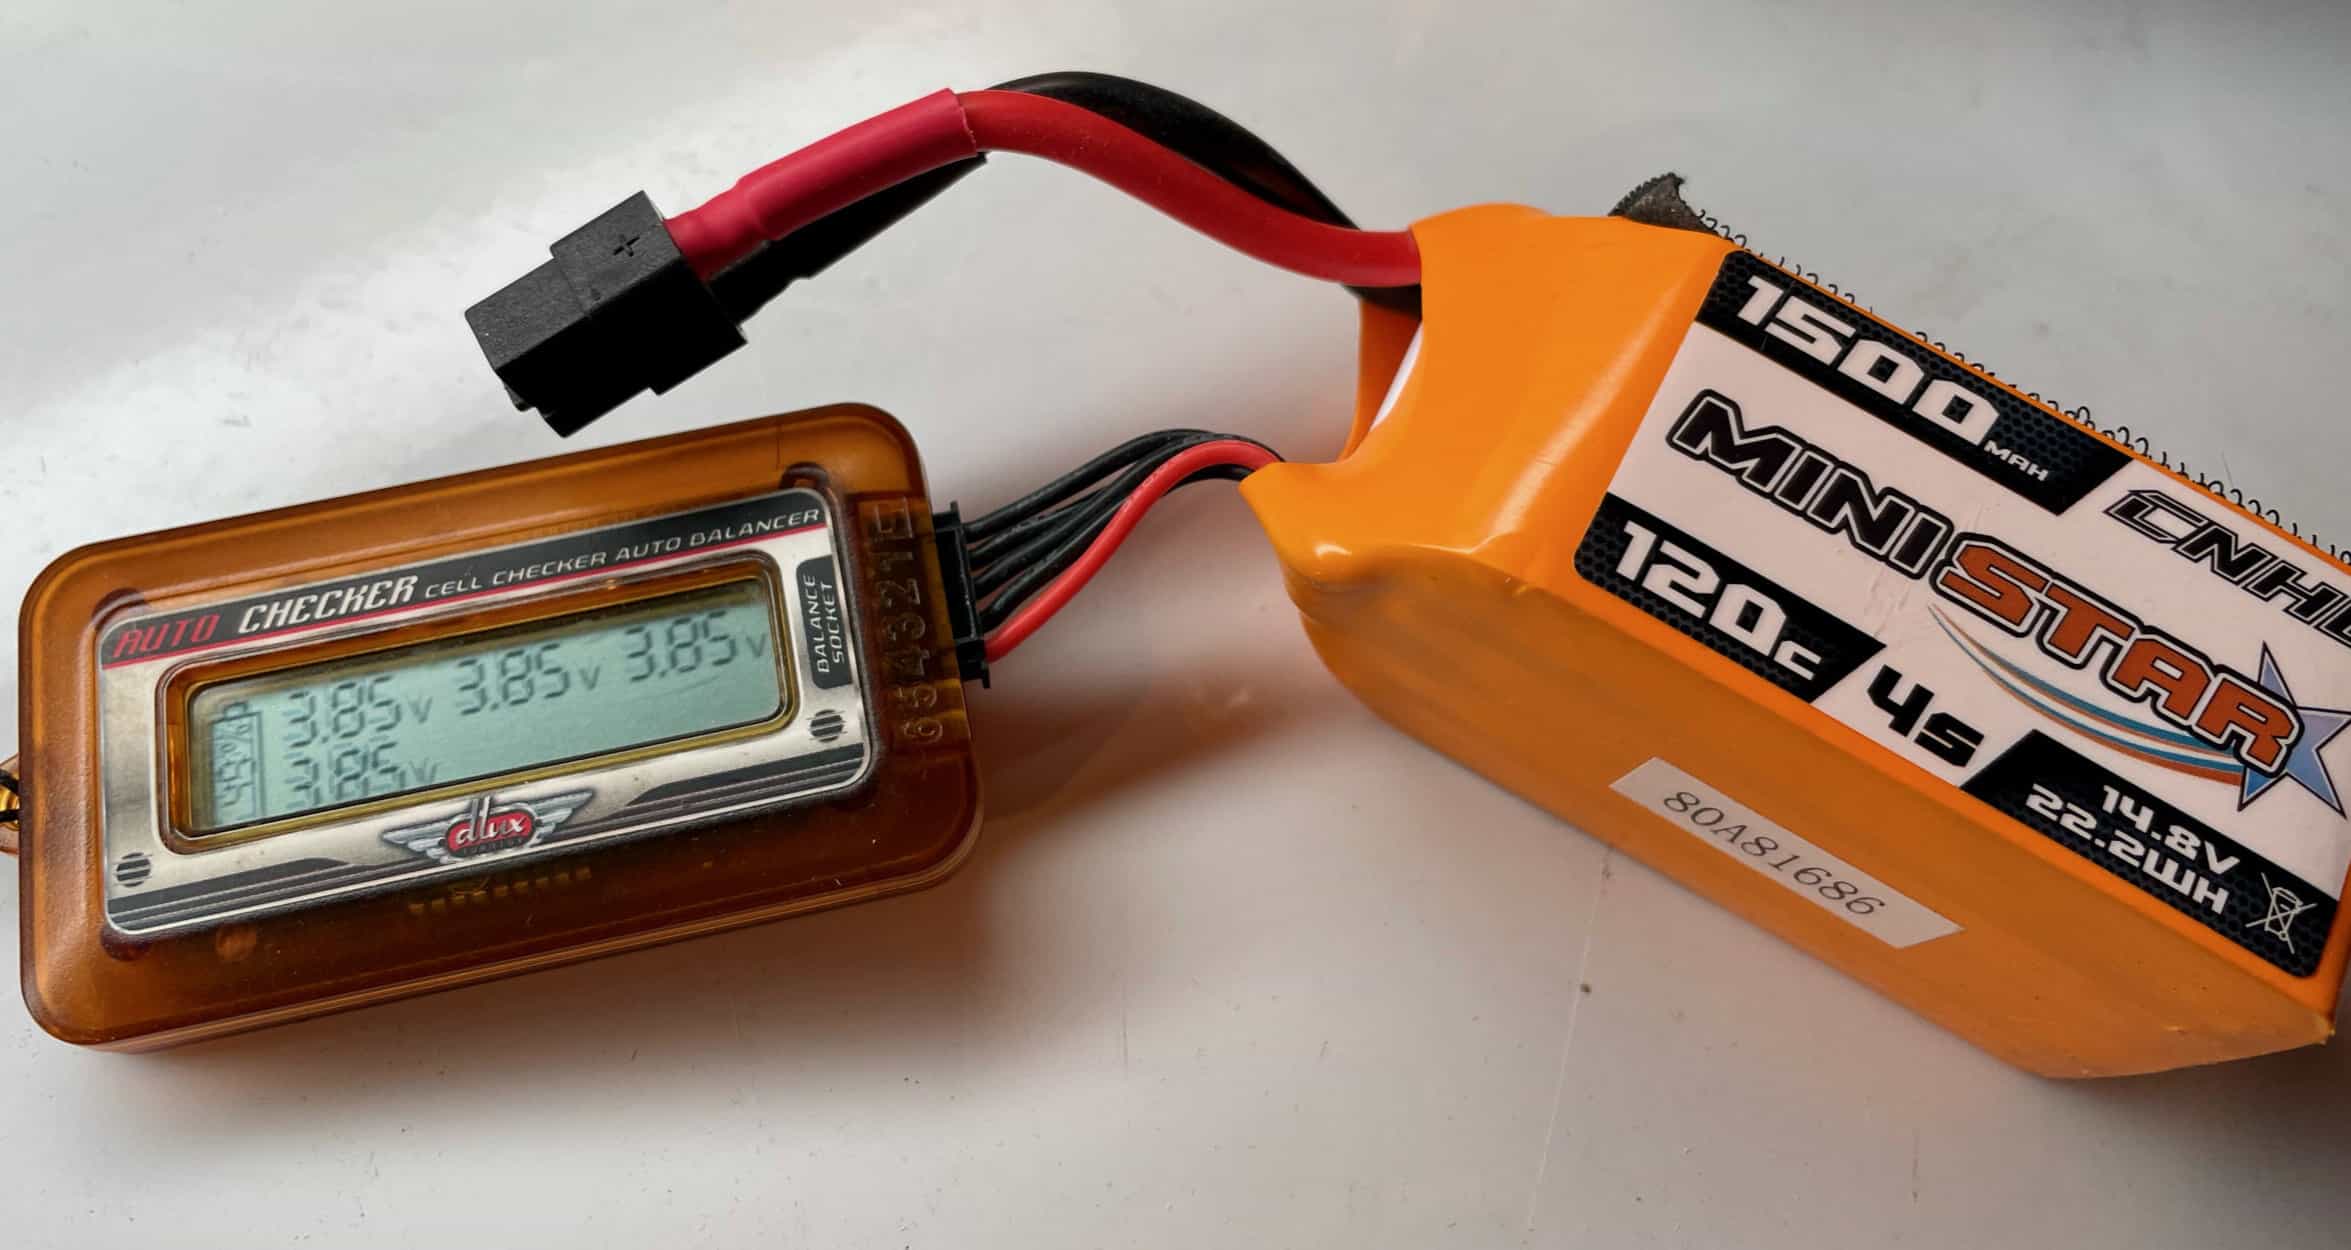 How to Check for a Damaged LiPo Battery?